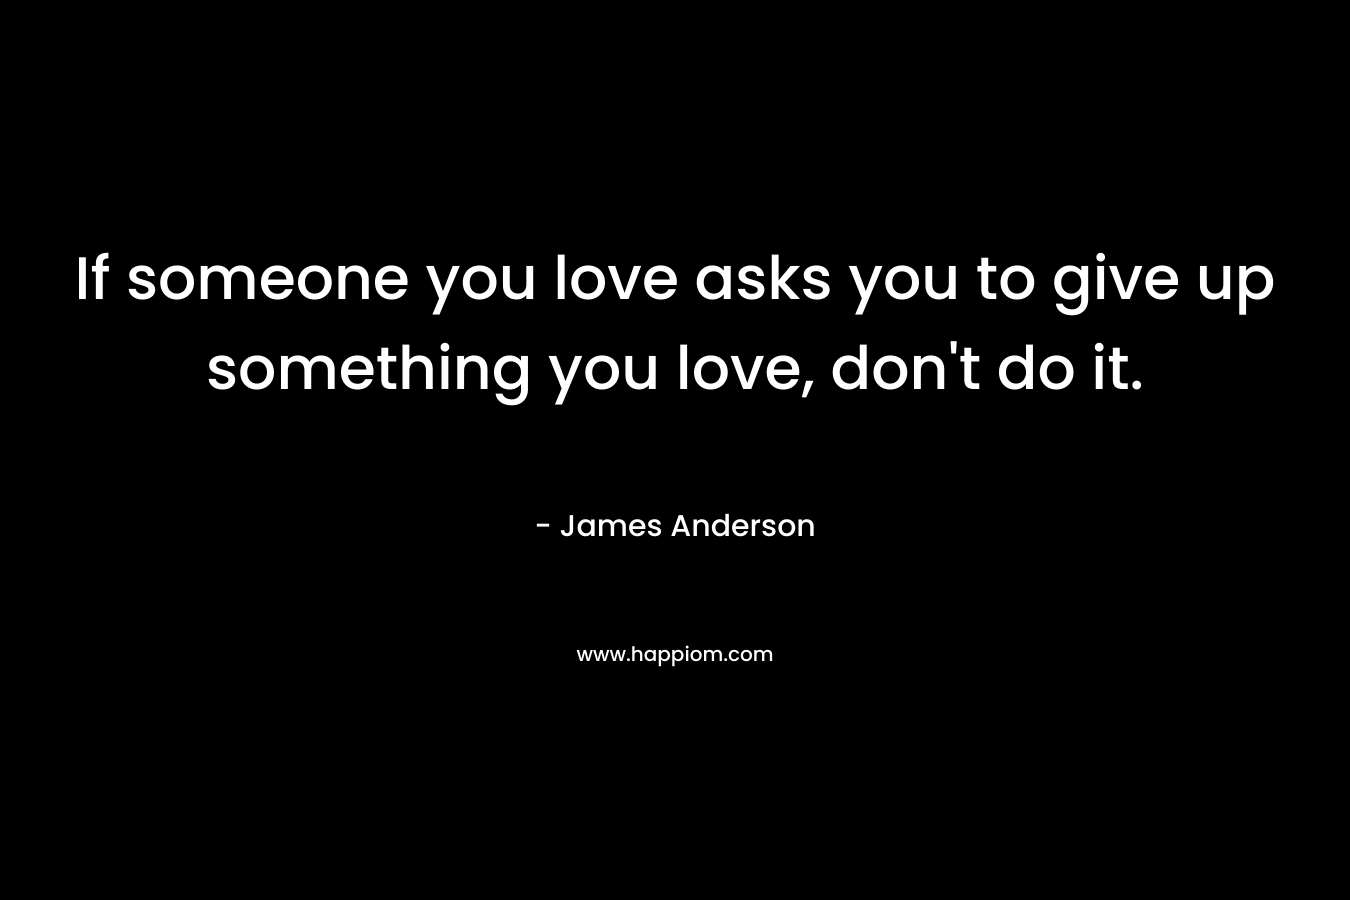 If someone you love asks you to give up something you love, don't do it.